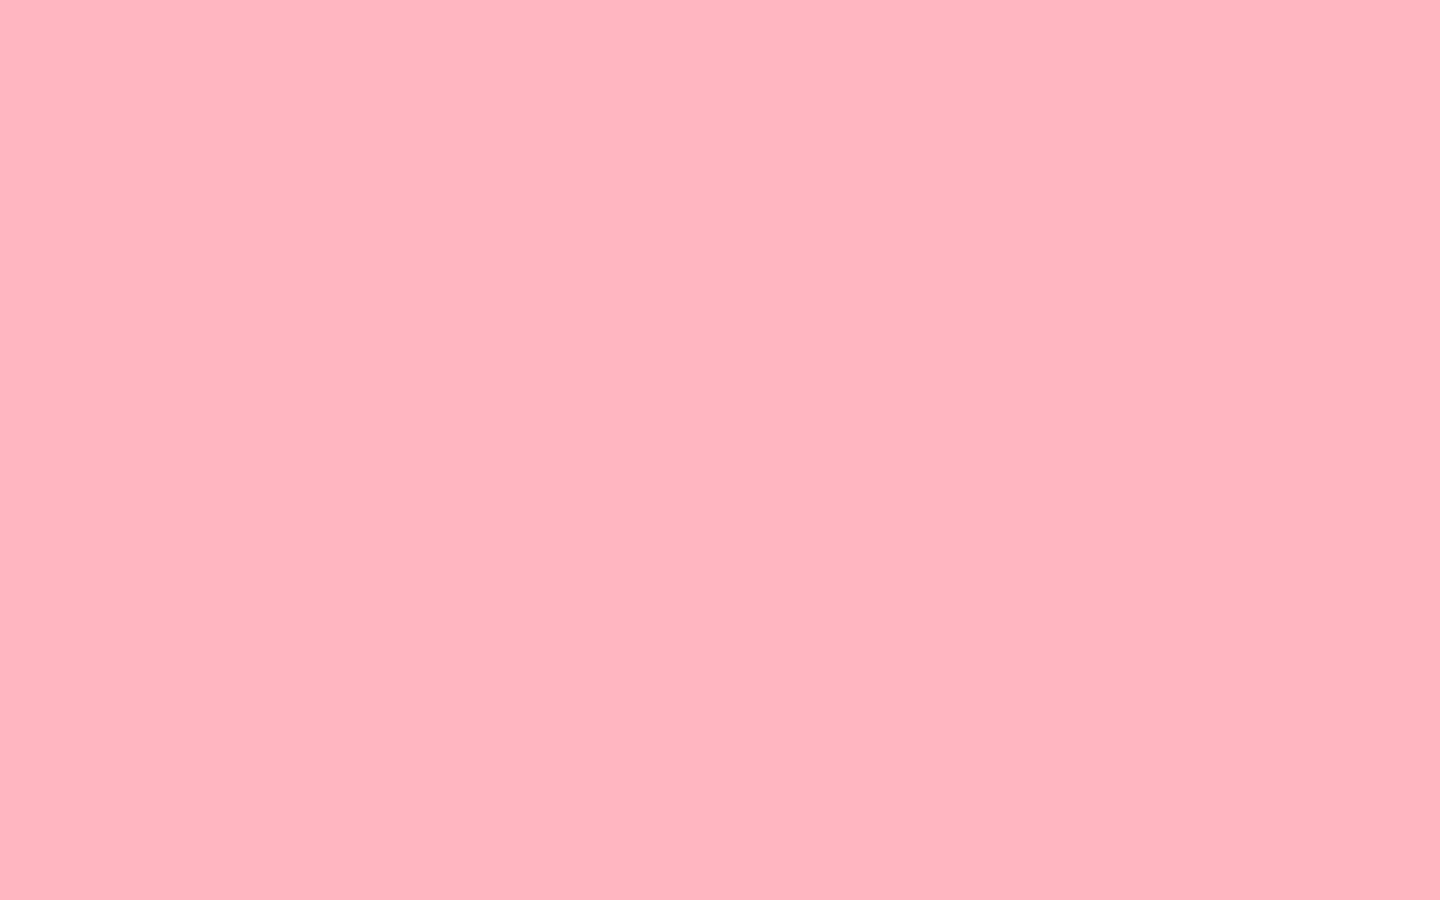  1440x900 resolution Light Pink solid color background view and 1440x900